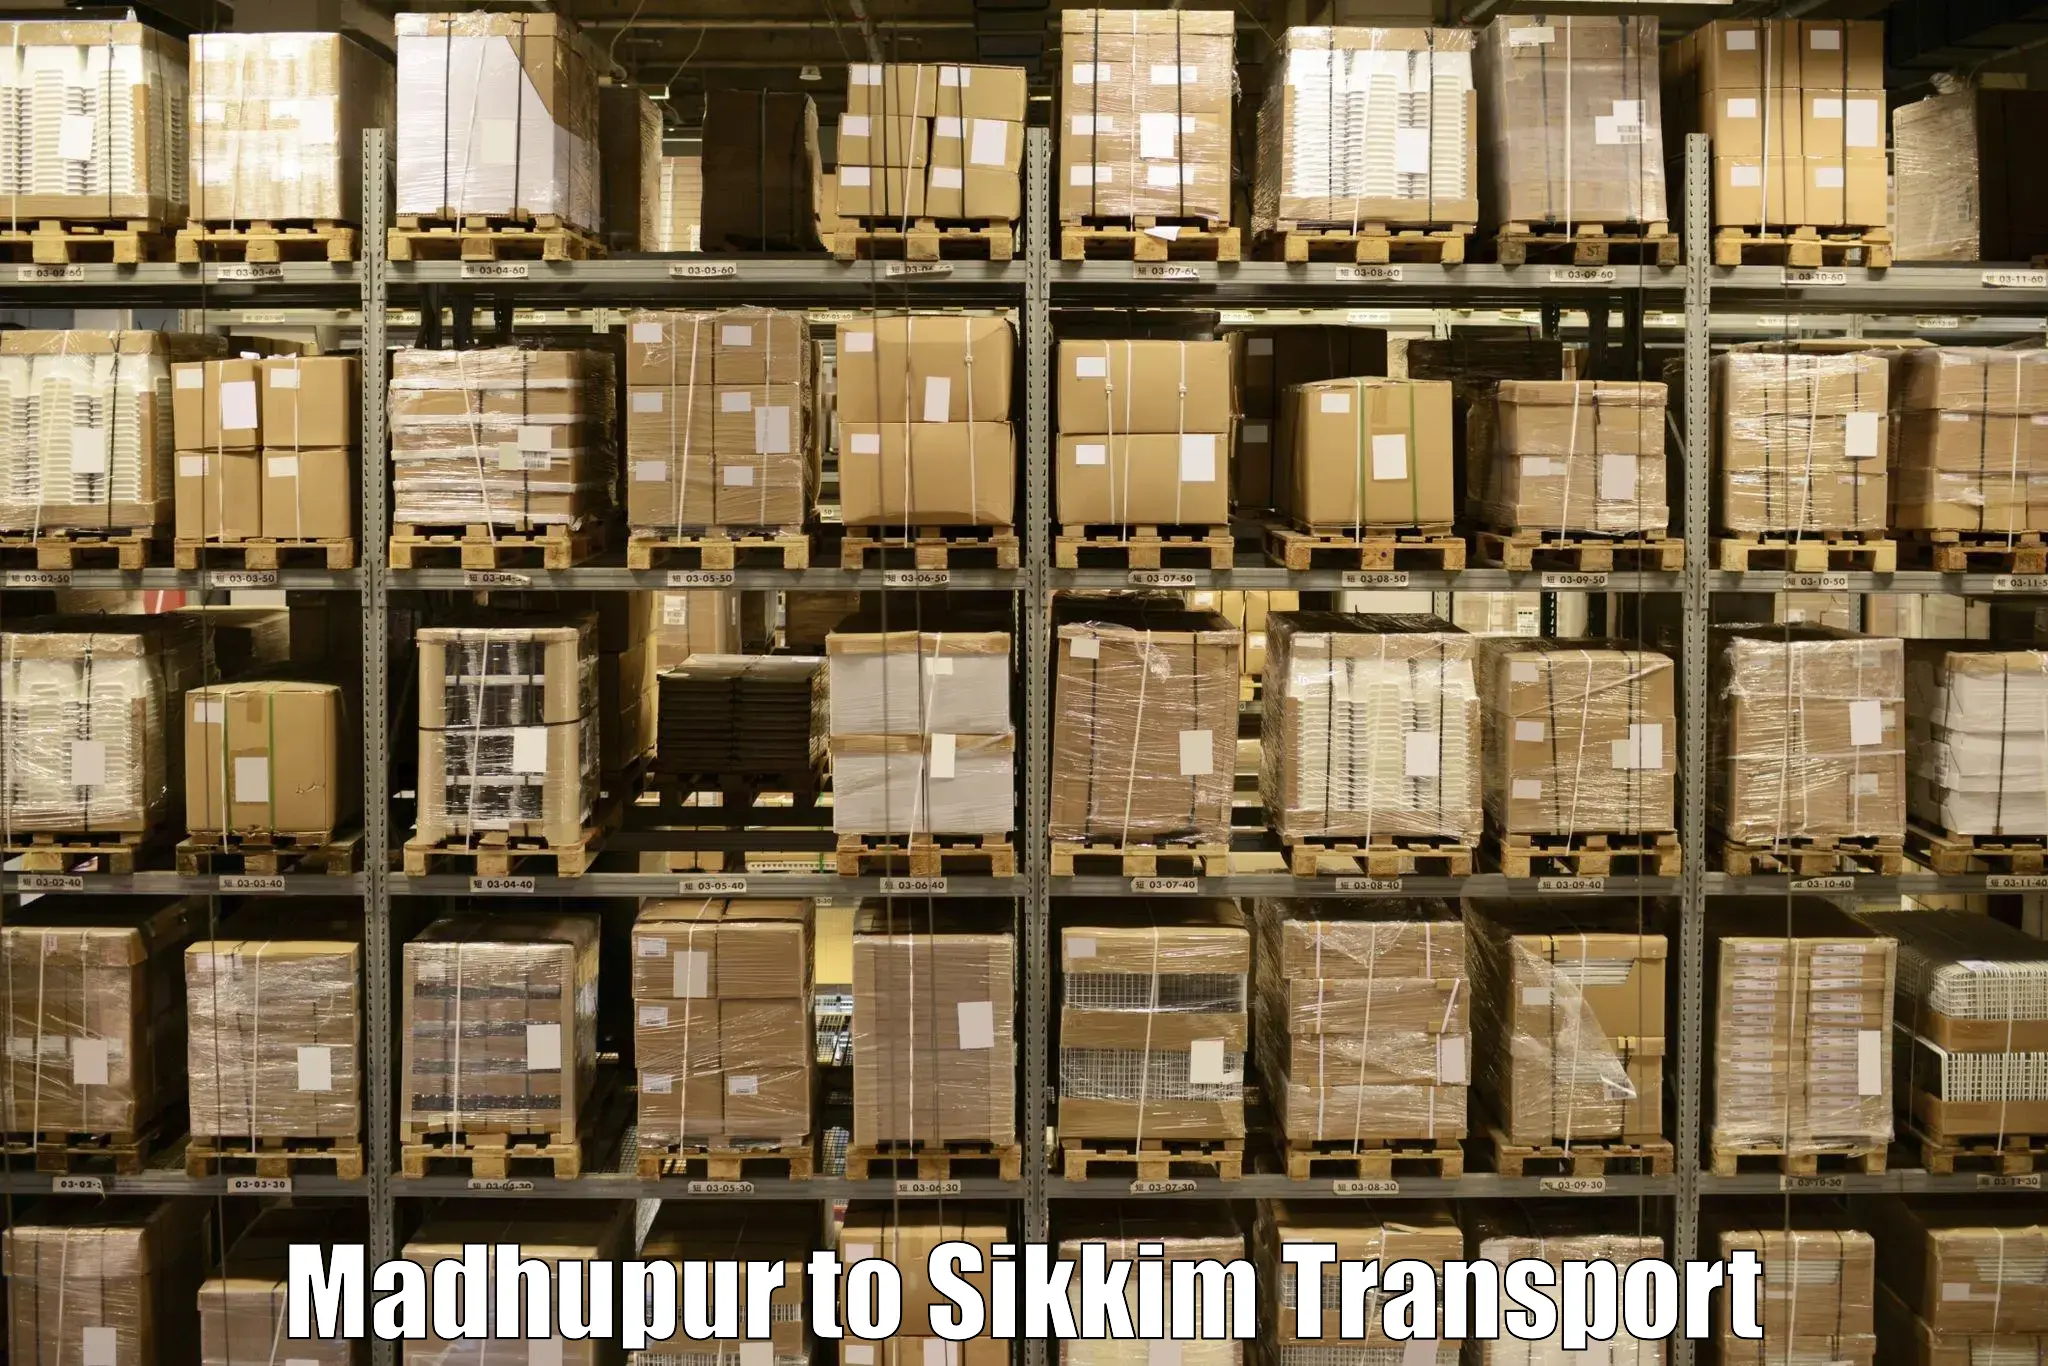 Transport in sharing Madhupur to West Sikkim